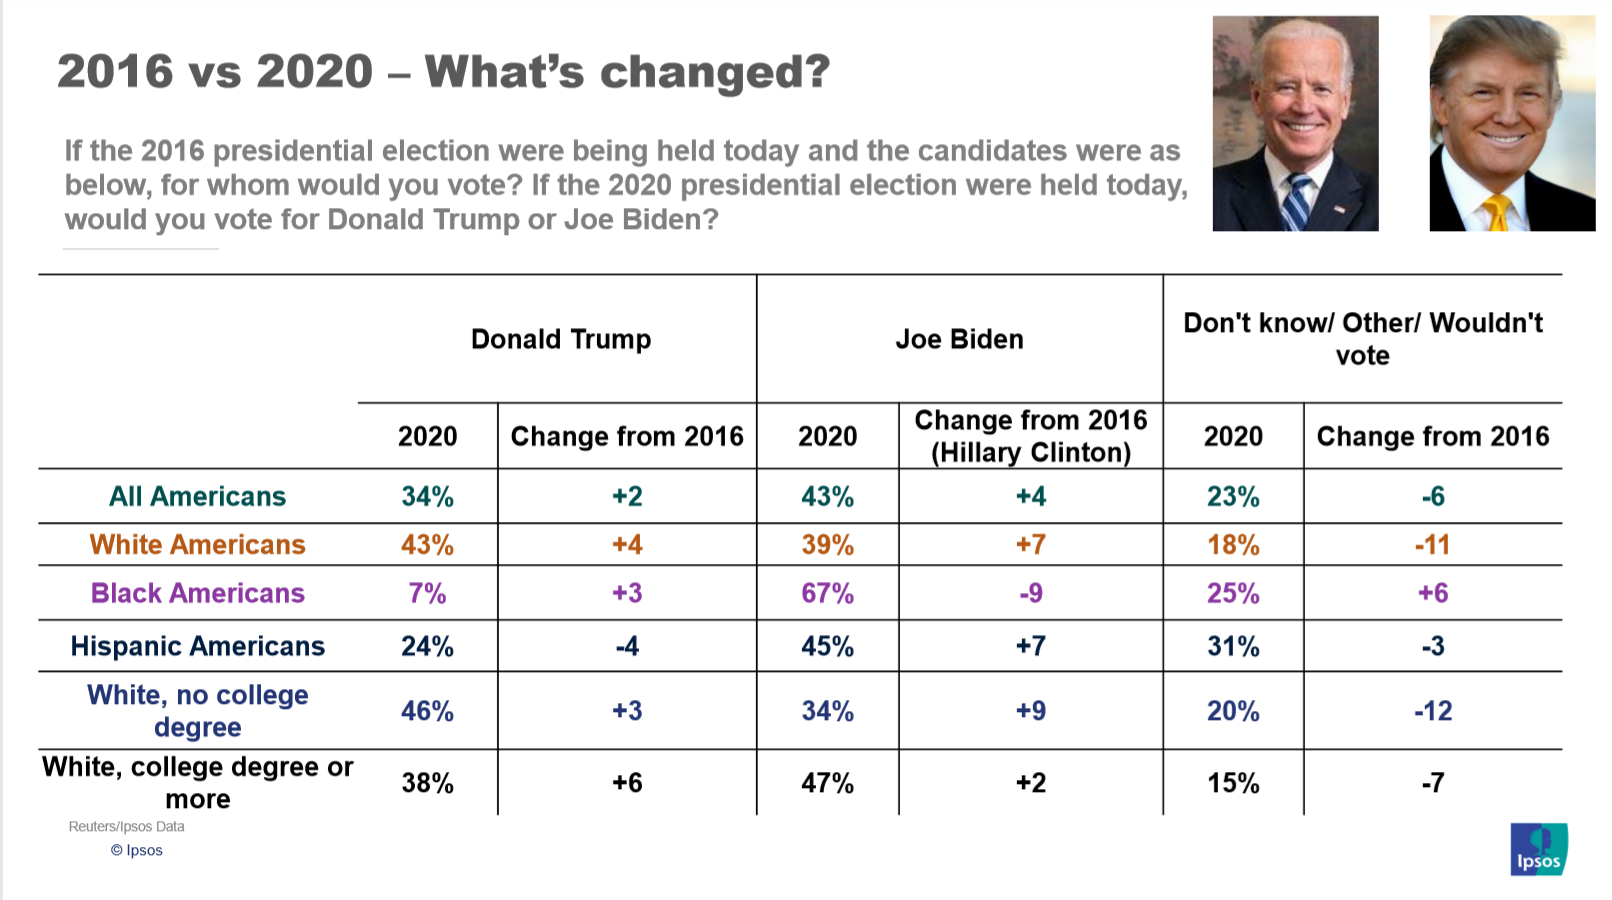 What's changed between June 2016 and June 2020 in the electorate